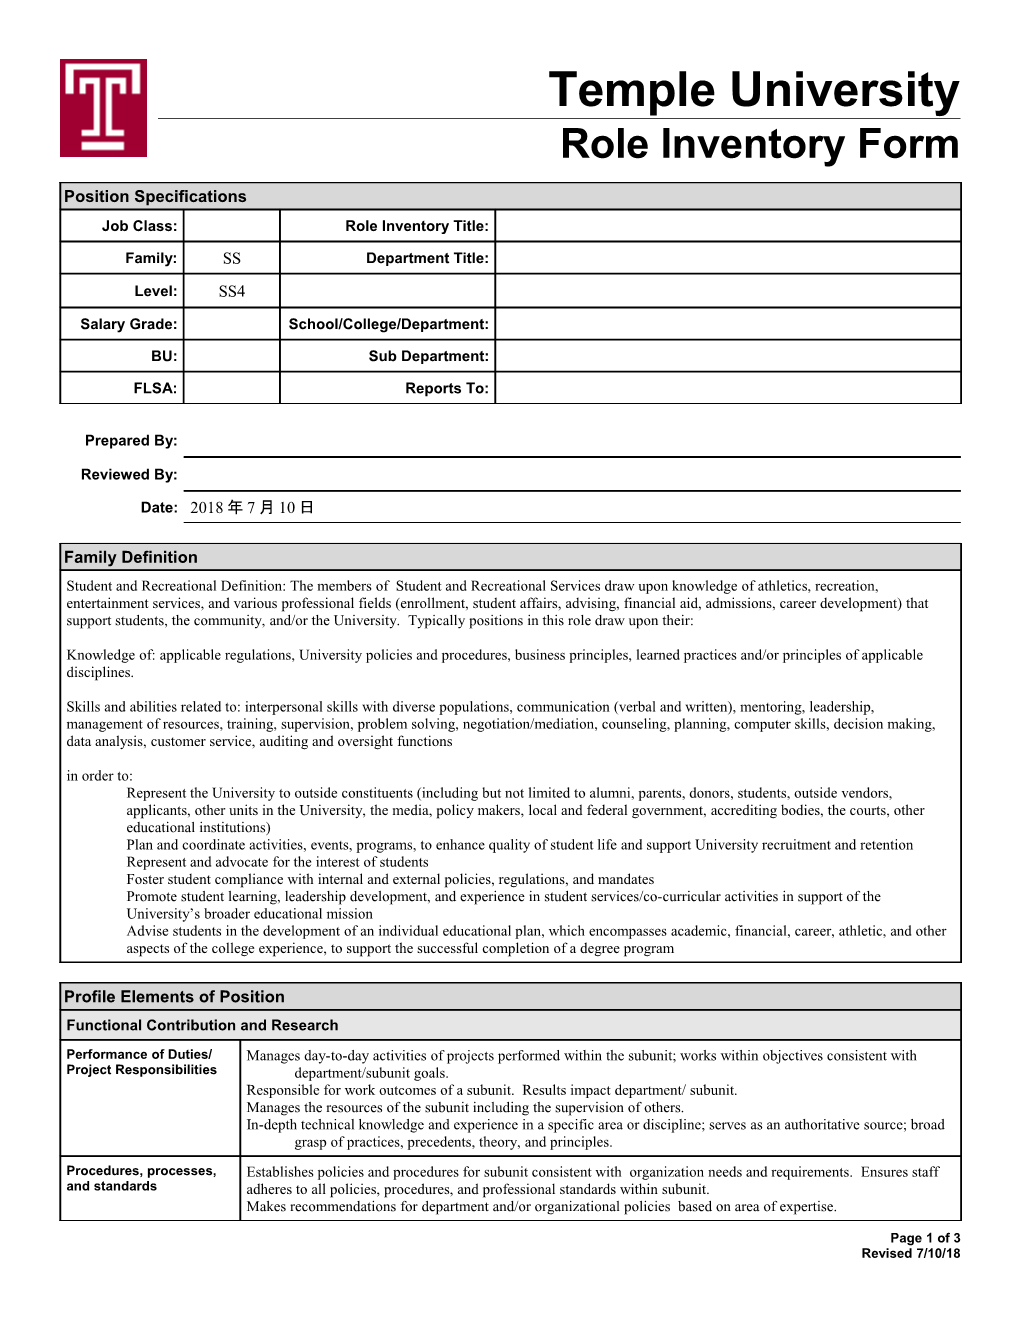 Role Inventory Form s1